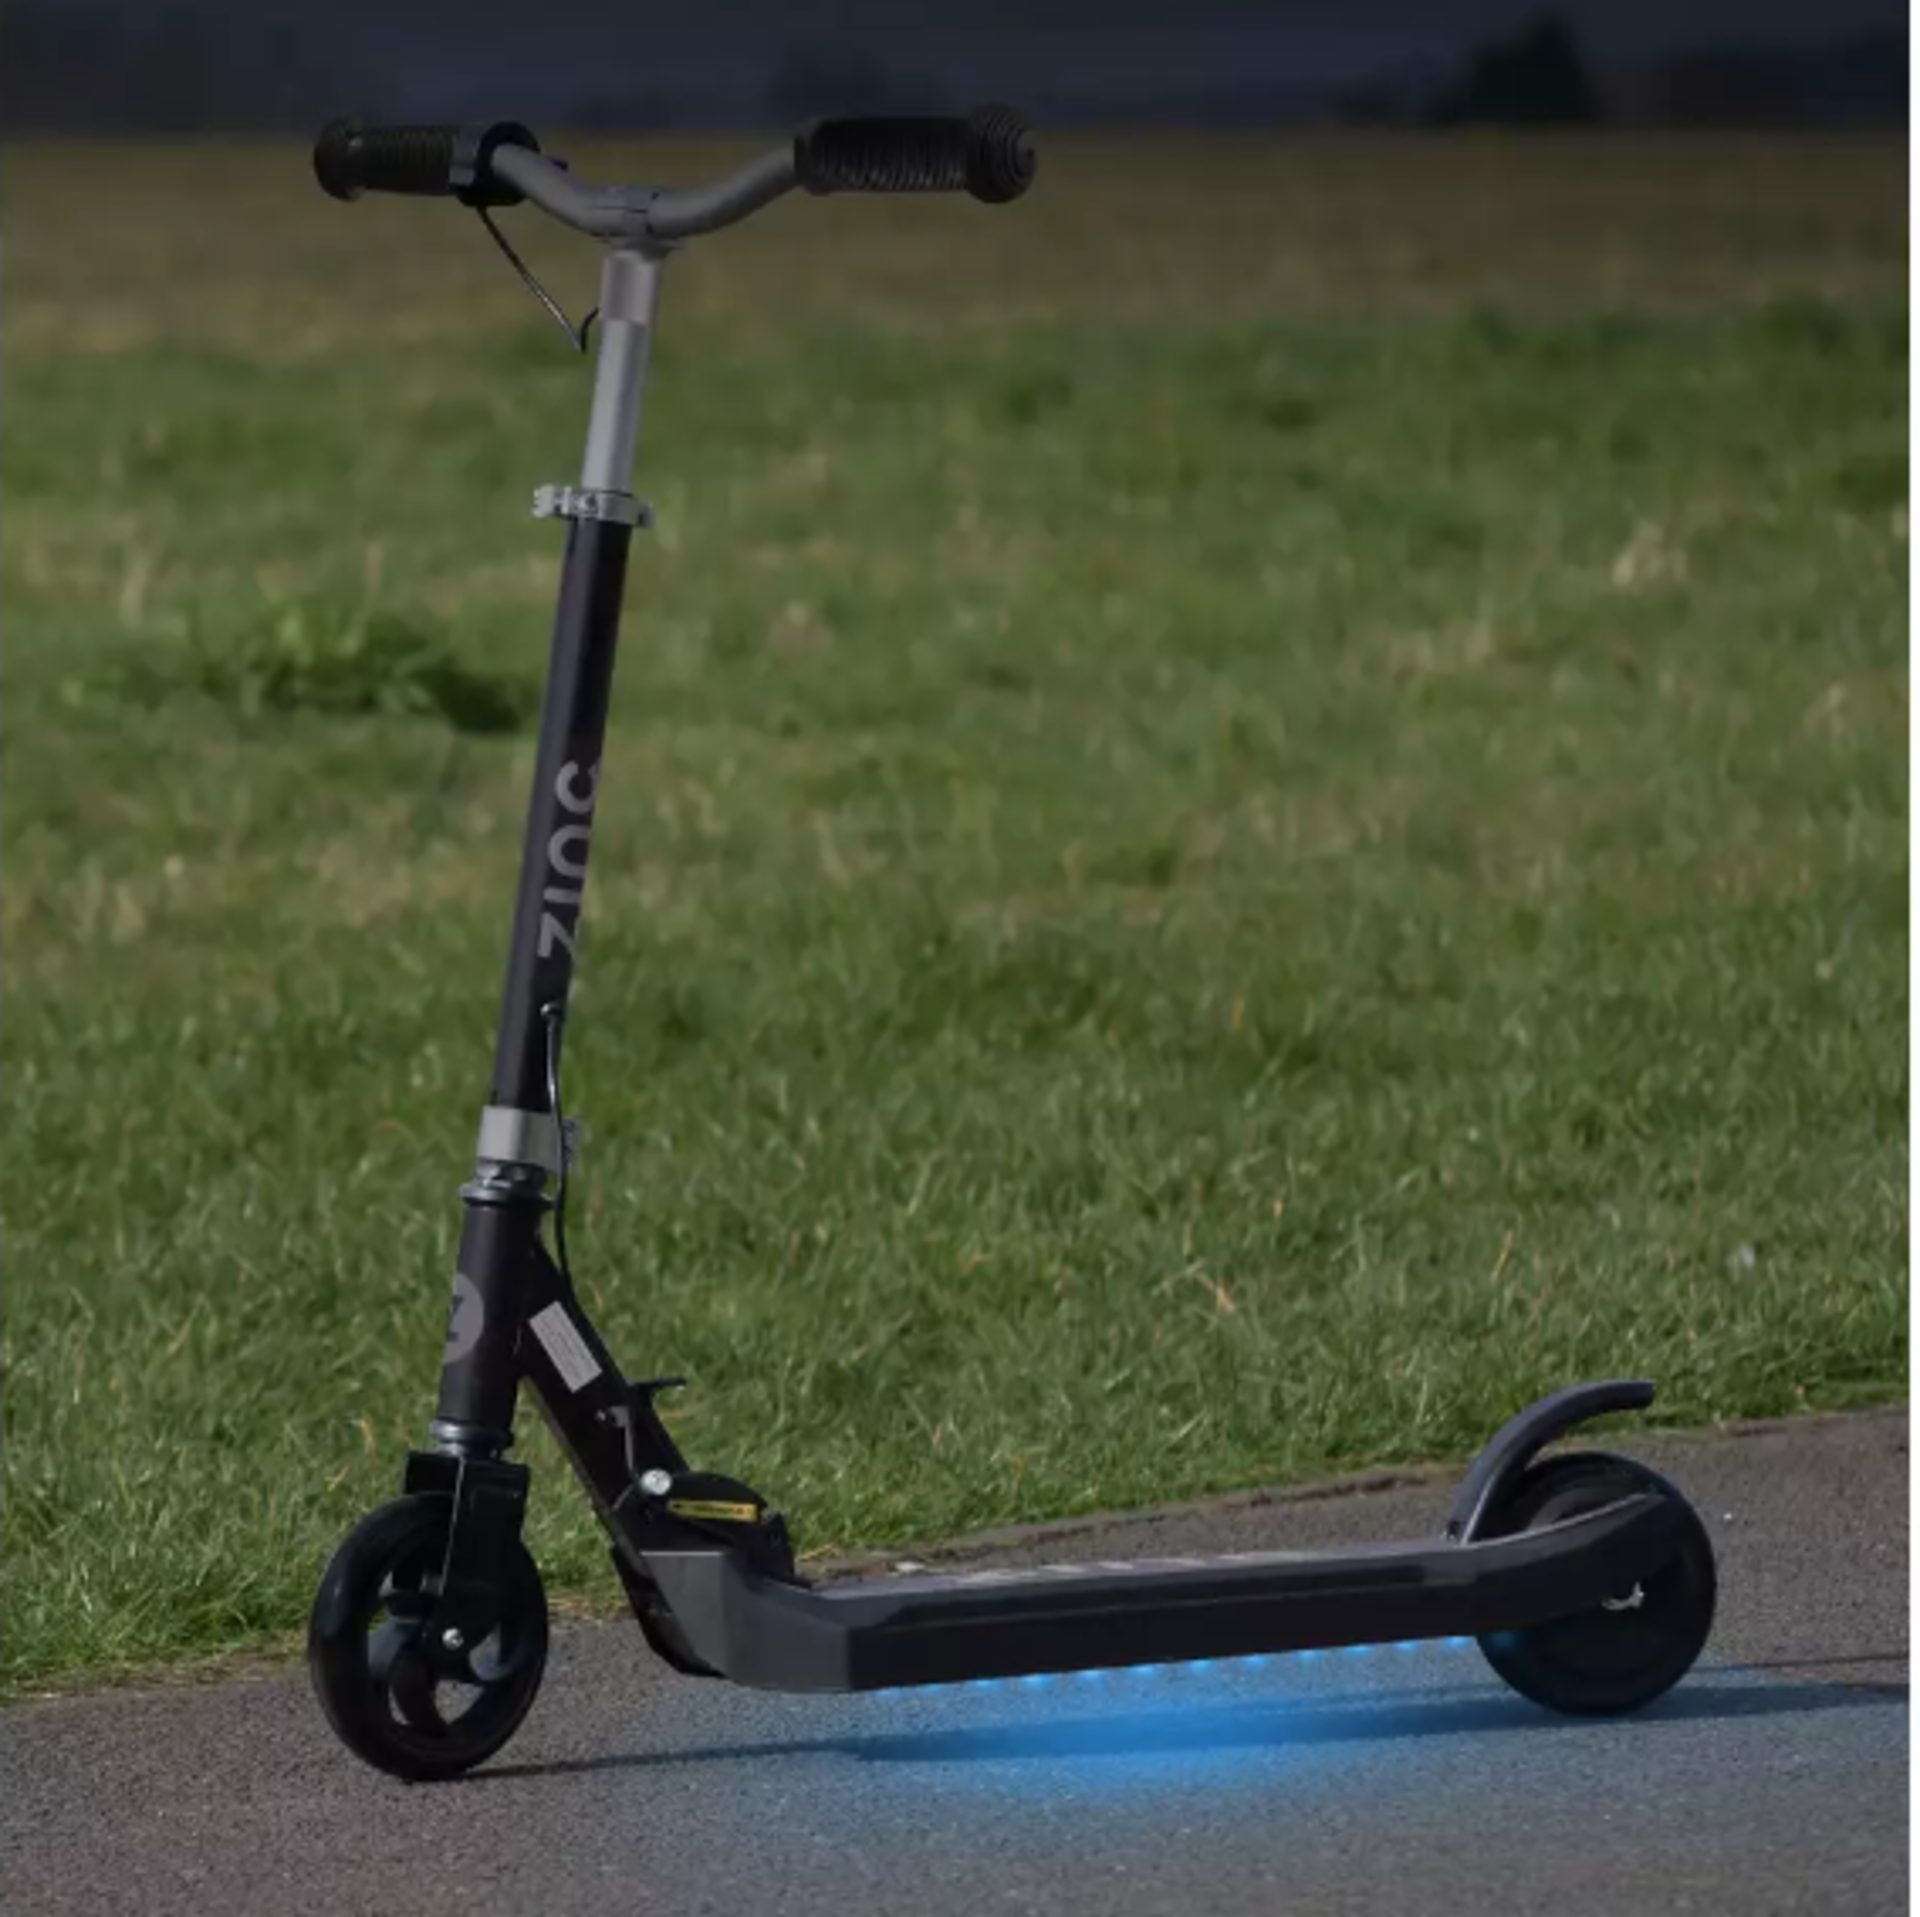 Zinc Folding Light Up Electric E5 Scooter. RRP £195.00. There is tons of fun to be had with the Zinc - Image 2 of 2